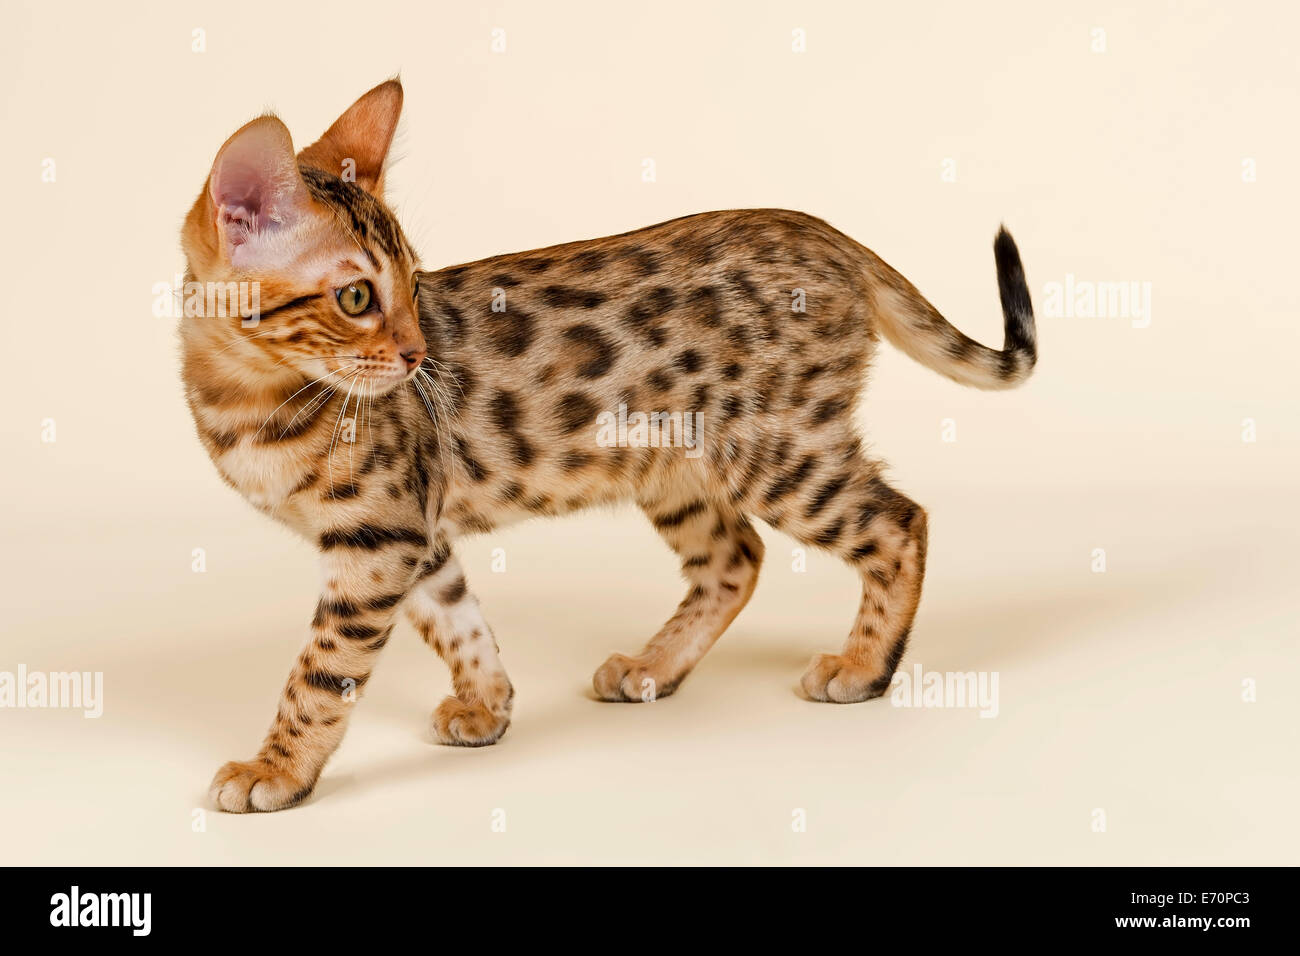 Bengal cat, kitten, coat colour brown rosetted, 16 weeks Stock Photo